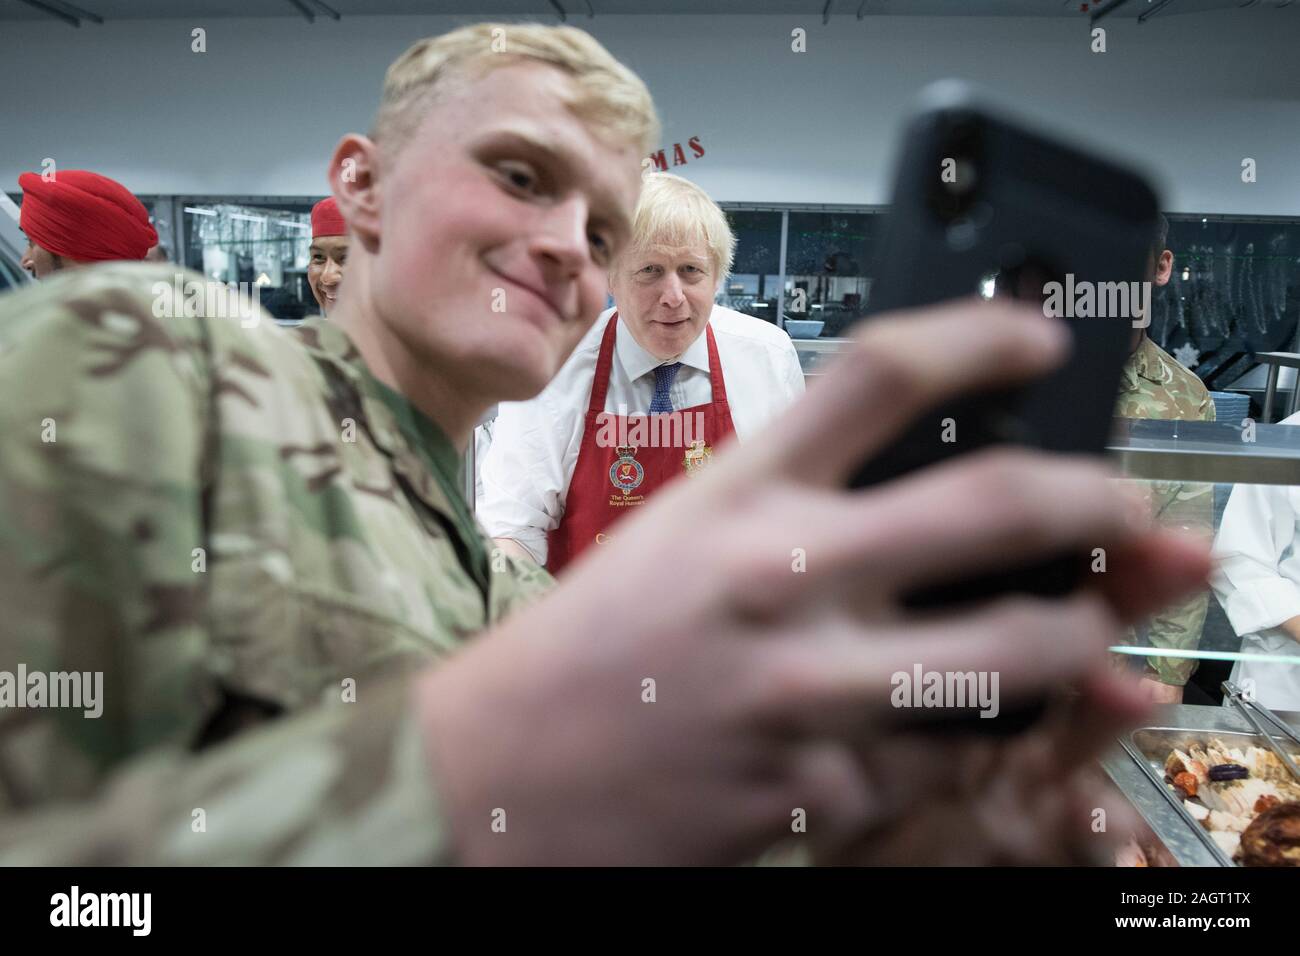 Prime Minister Boris Johnson meets soldiers after serving Christmas lunch to British troops stationed in Estonia during a one-day visit to the Baltic country. PA Photo. Picture date: Saturday December 21, 2019. The Prime Minister thanked the servicemen and women for their work as he joined them for lunch at the Tapa military base near the capital Tallinn. The base is home to 850 British troops from the Queen's Royal Hussars who lead the Nato battlegroup along with personnel from Estonia, France and Denmark. See PA story POLITICS Estonia. Photo credit should read: Stefan Rousseau/PA Wire Stock Photo